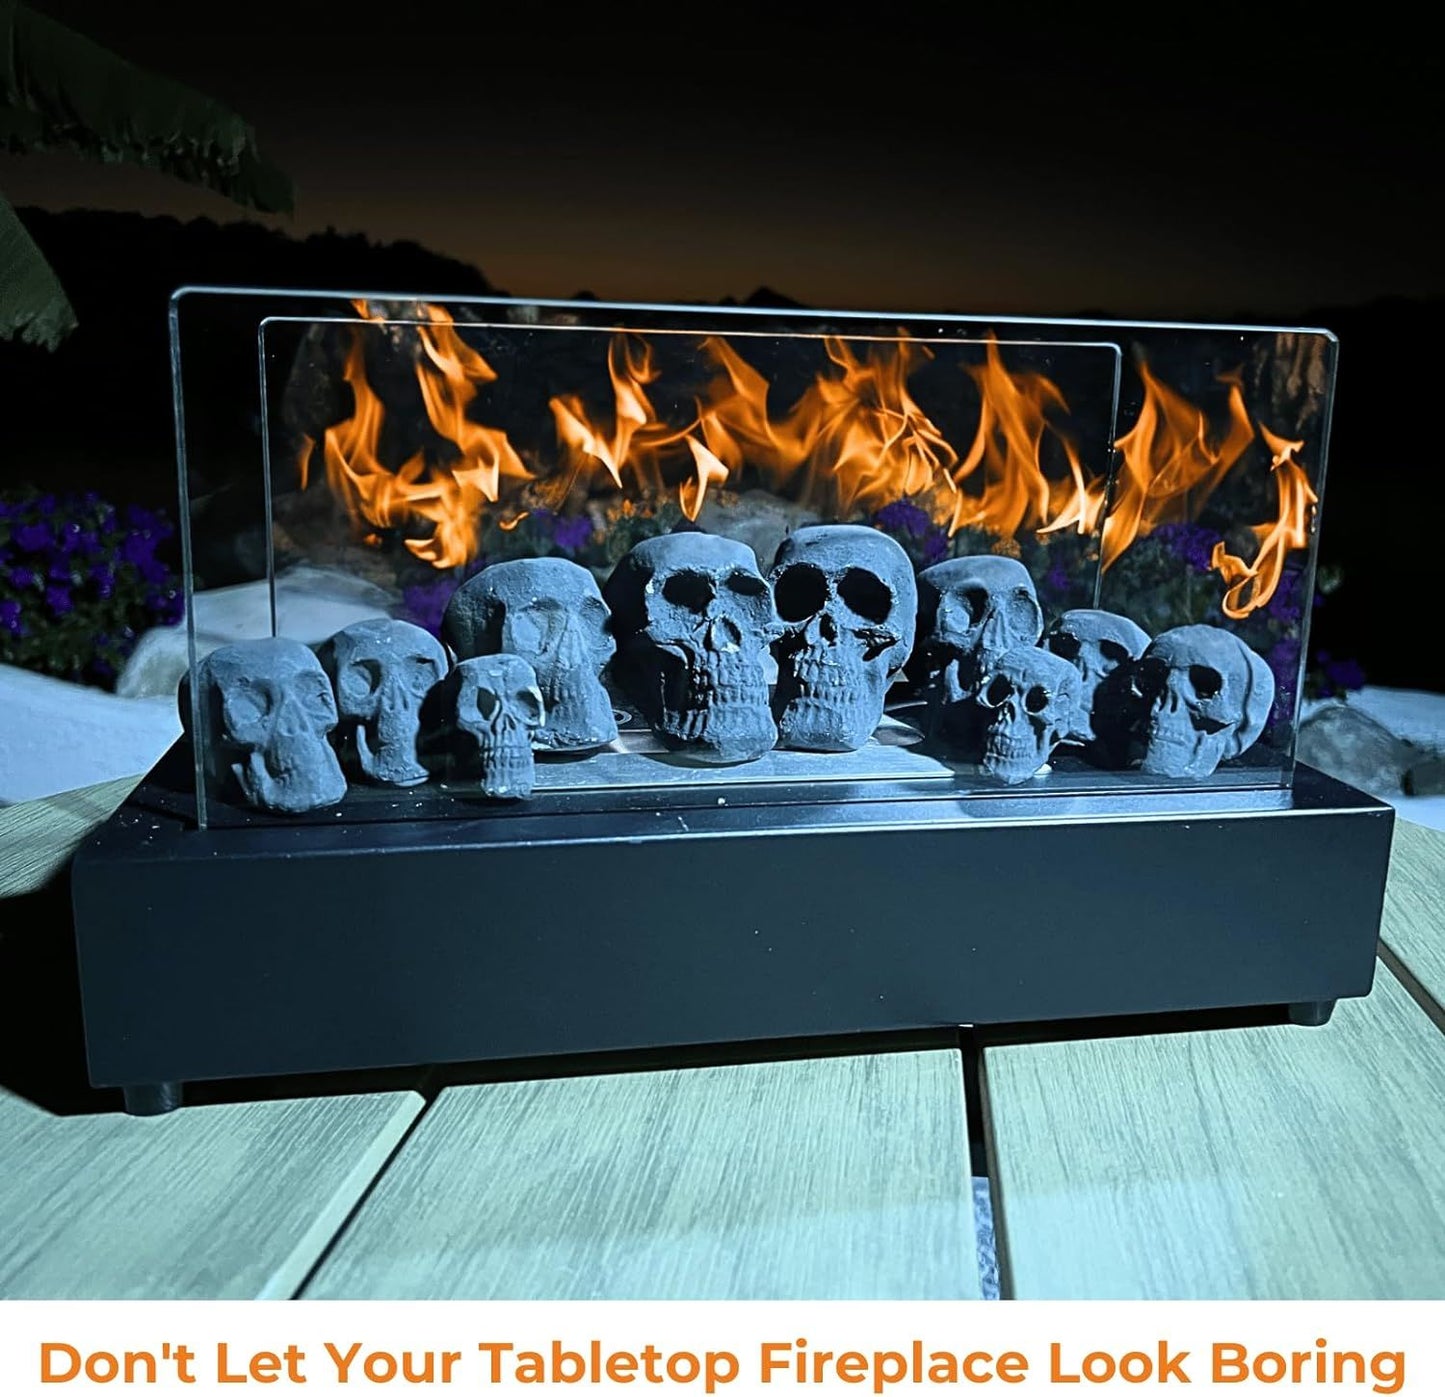 Ceramic Skulls for Fire Pit, Outdoor Fire Tables, 7pcs Reusable Spooky Imitated Human Skull